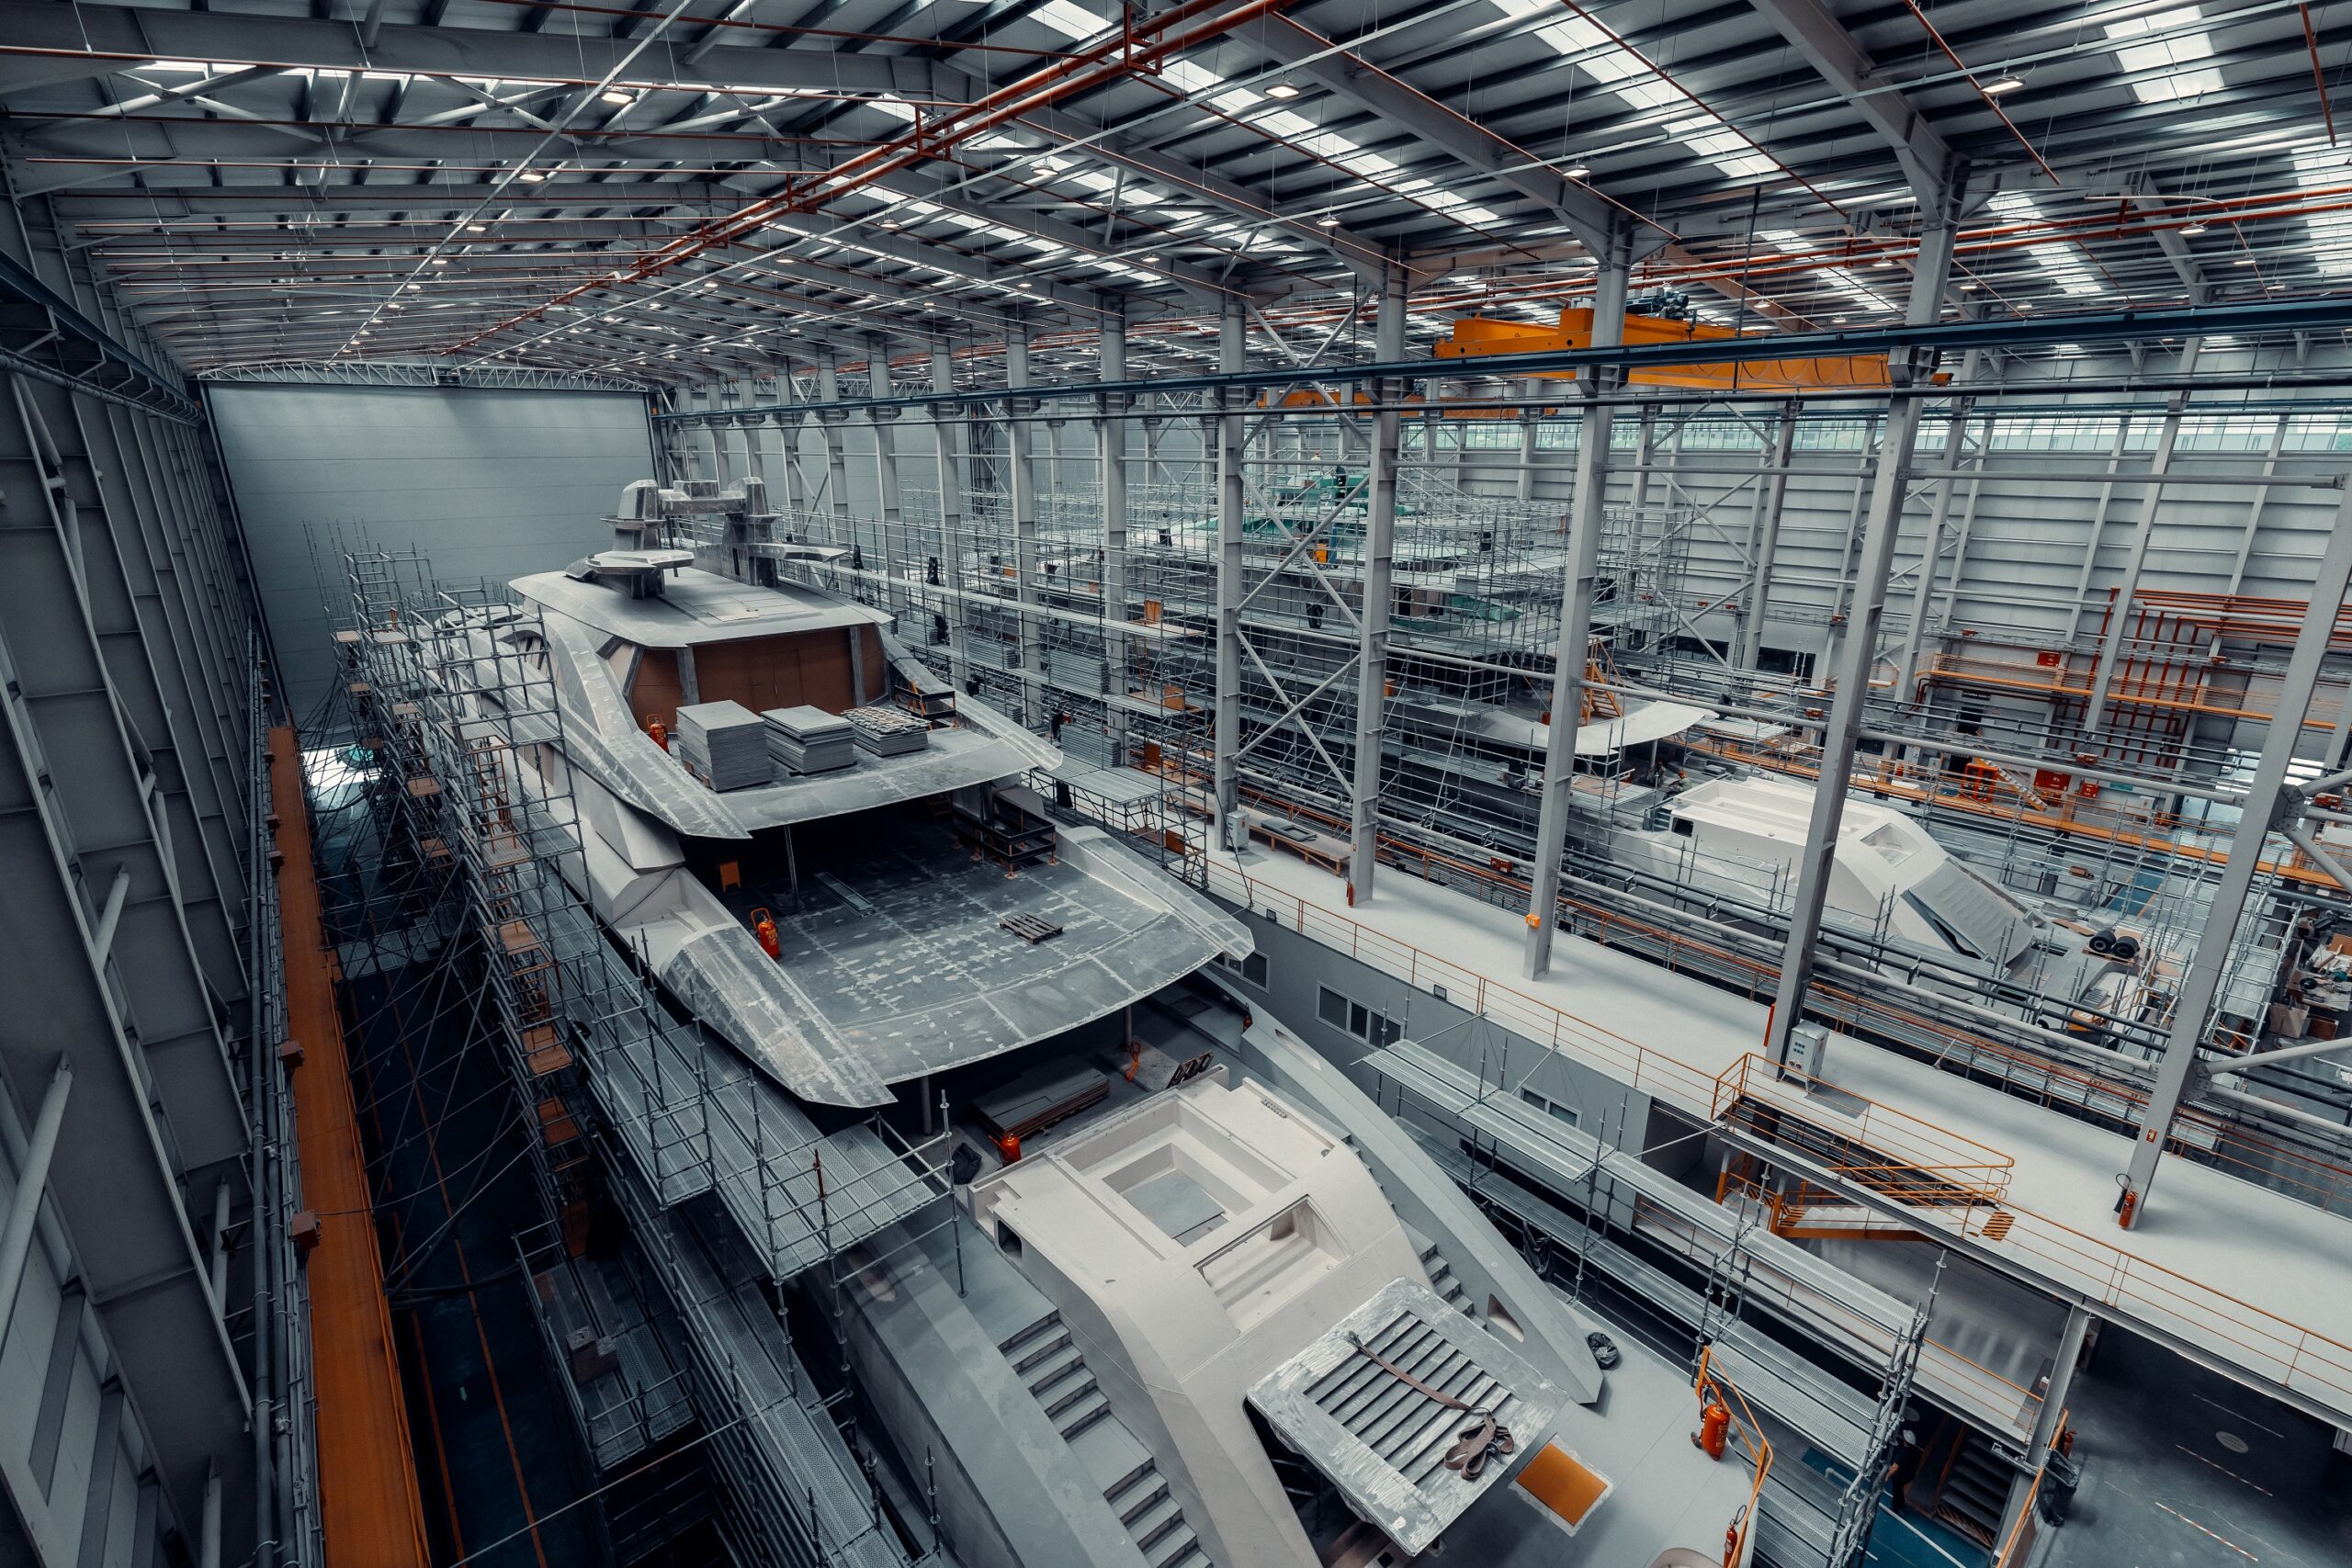 Two yachts being built in a closed hangar